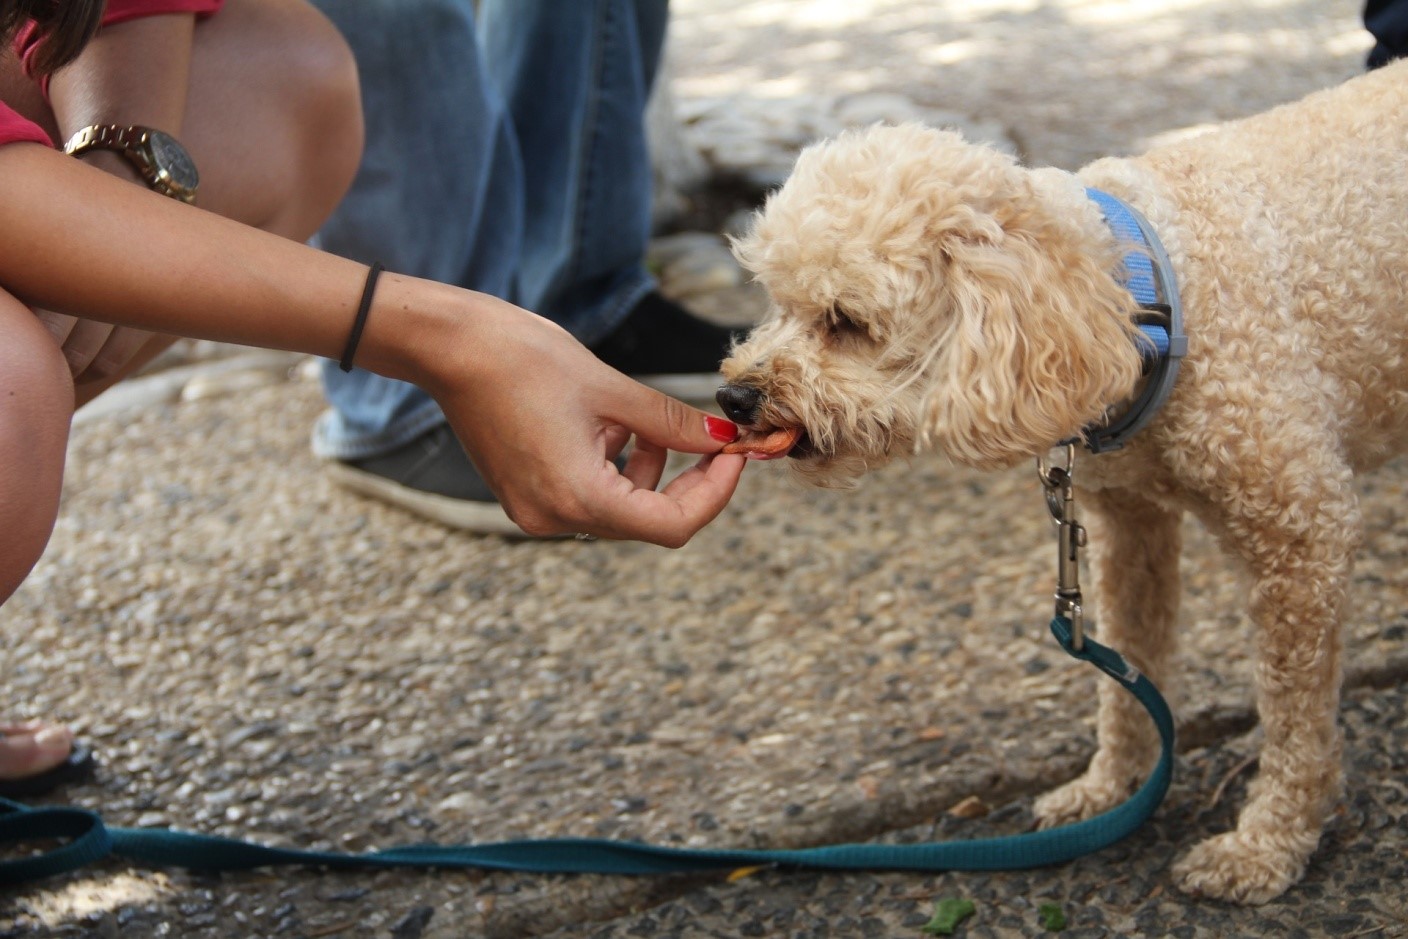 Pet dog being fed a treat by owner